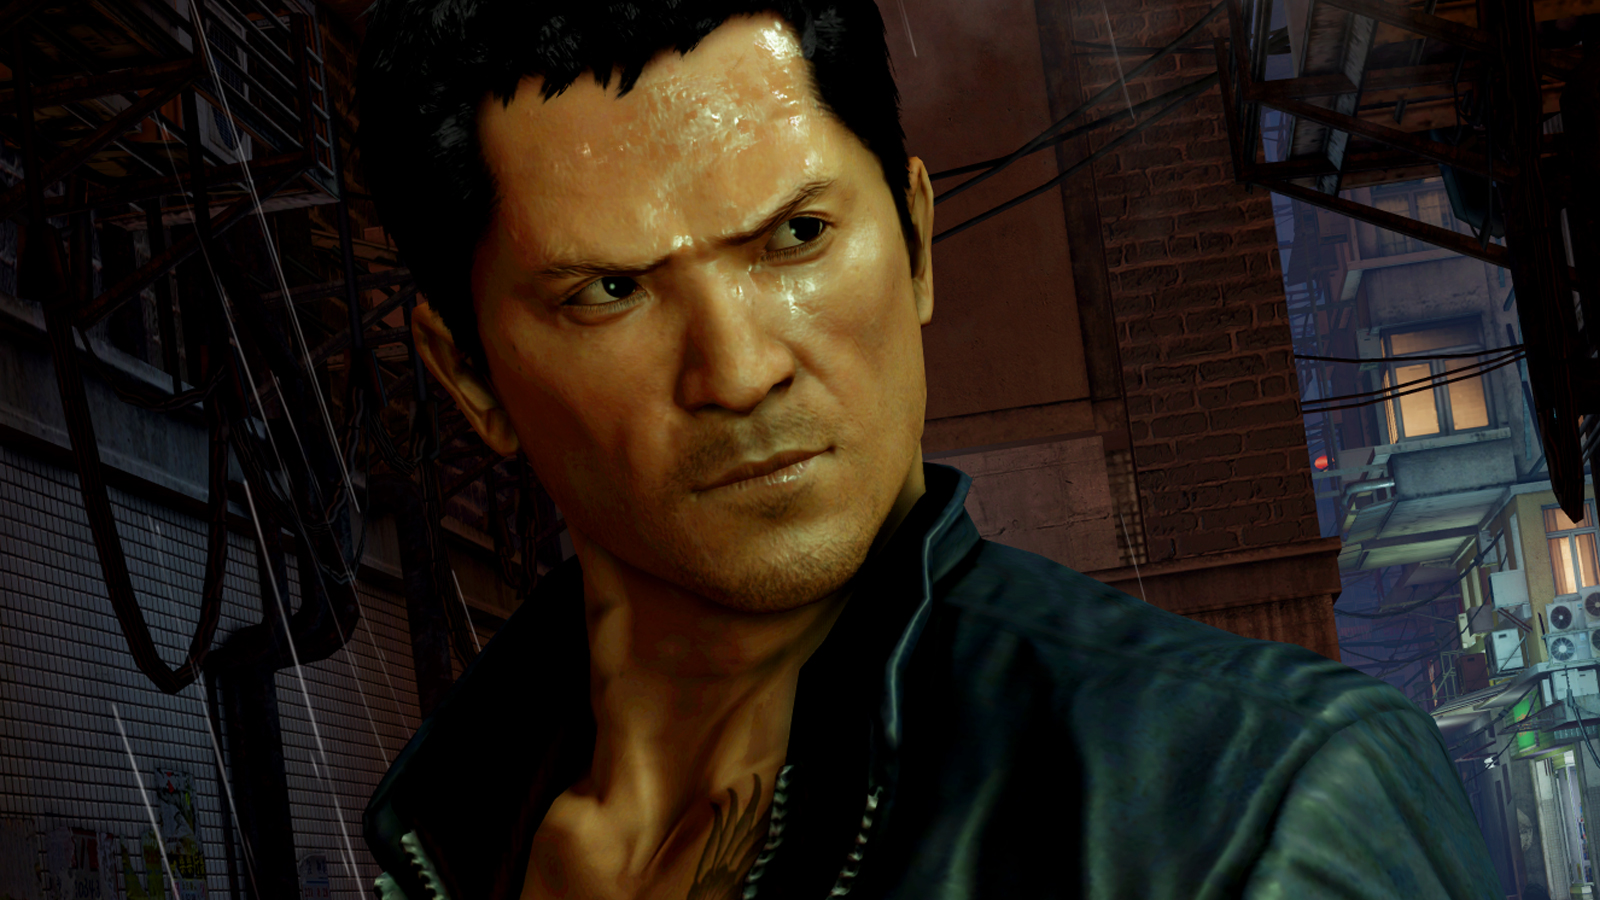 United Front Games, developer of Sleeping Dogs, is closing down